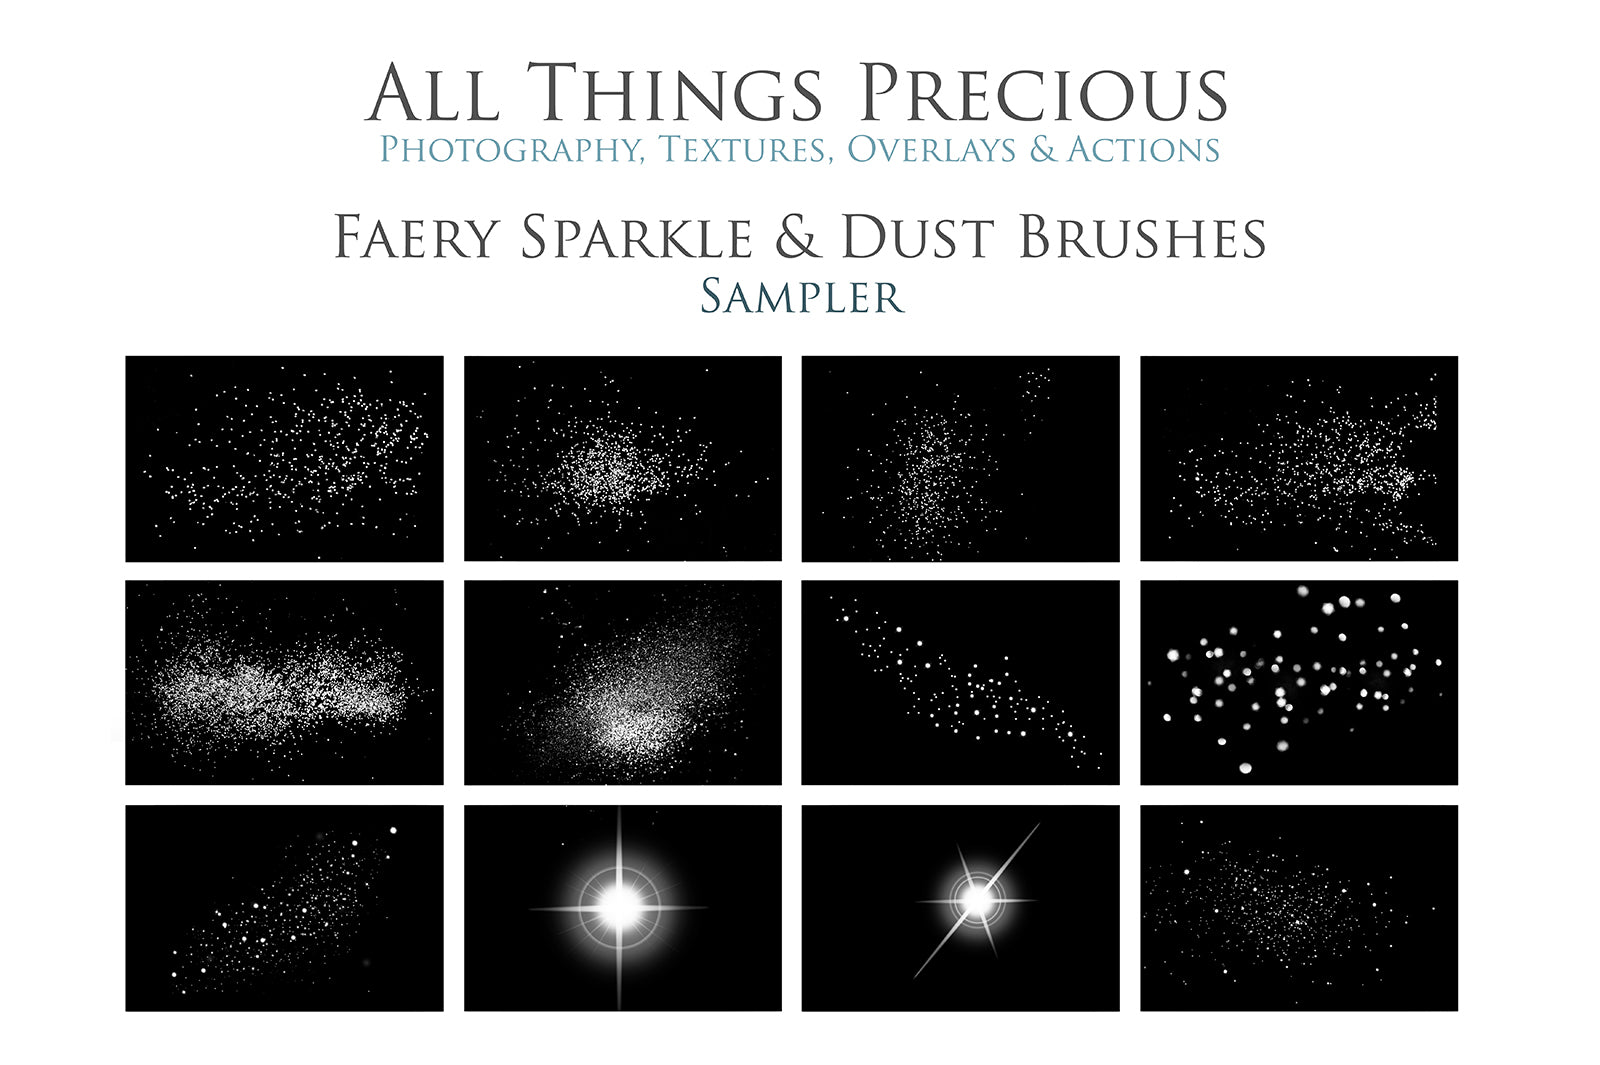 Magical Fairy sparkle and dust Photoshop brushes for photography and digital design.  Digital Stamps for scrapbooking, photography and graphic design. Assets and Add ons. High resolution digital files.  ATP Textures 